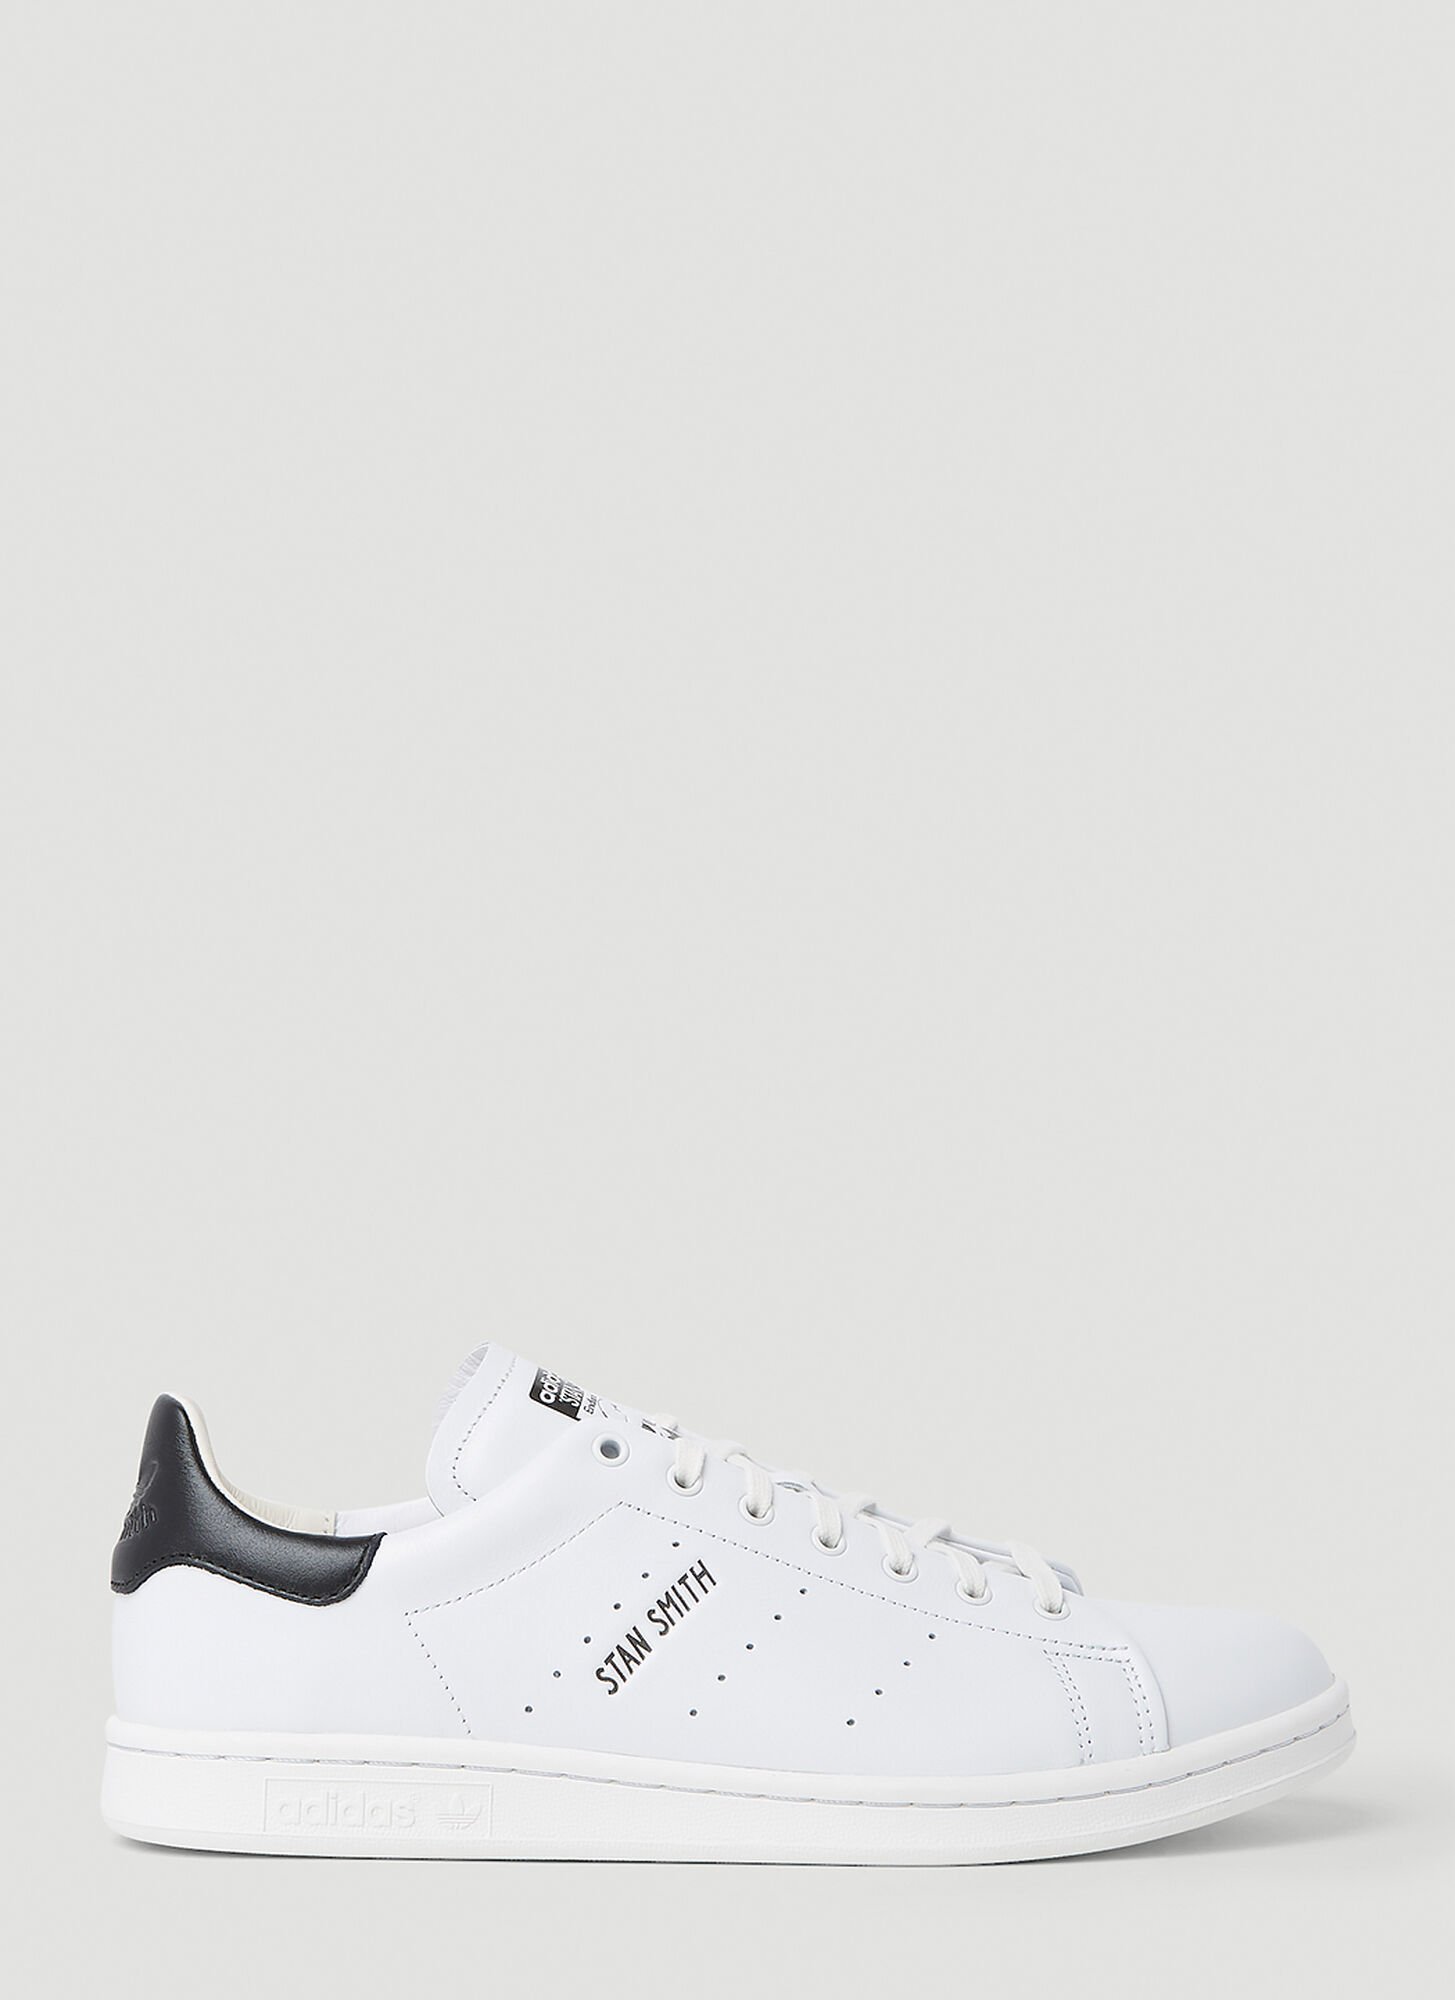 Adidas Originals Stan Smith Leather Trainers In White